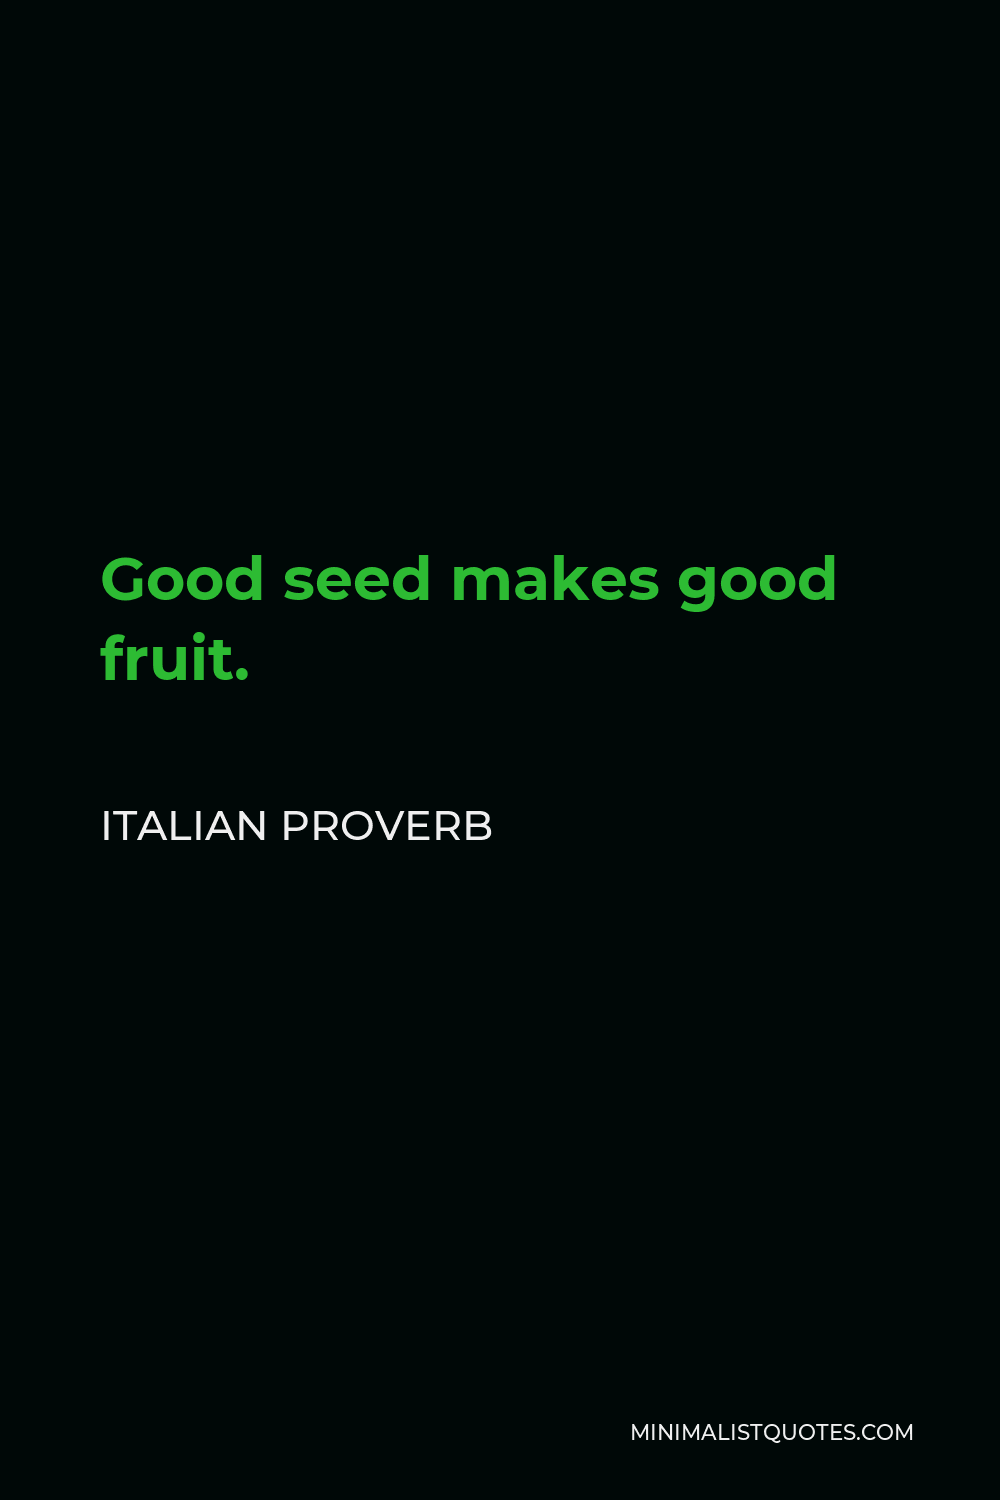 Italian Proverb Quote - Good seed makes good fruit.